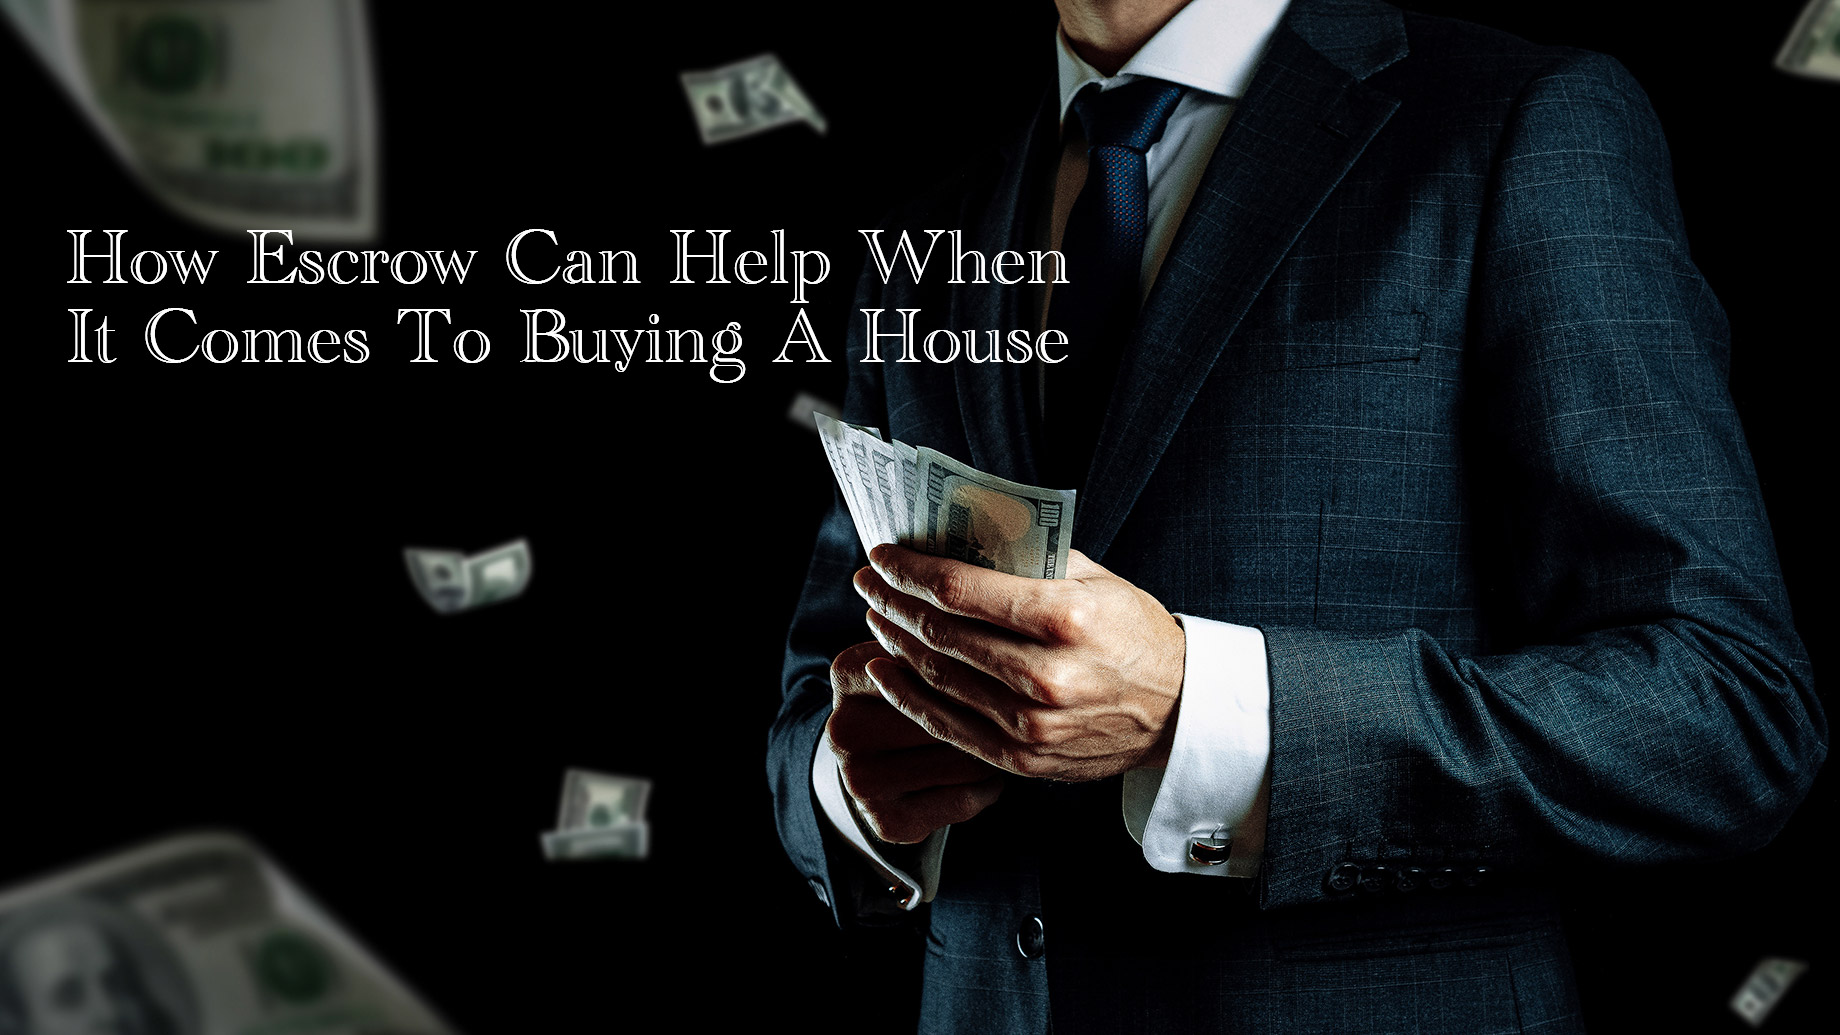 How Escrow Can Help When It Comes To Buying A House